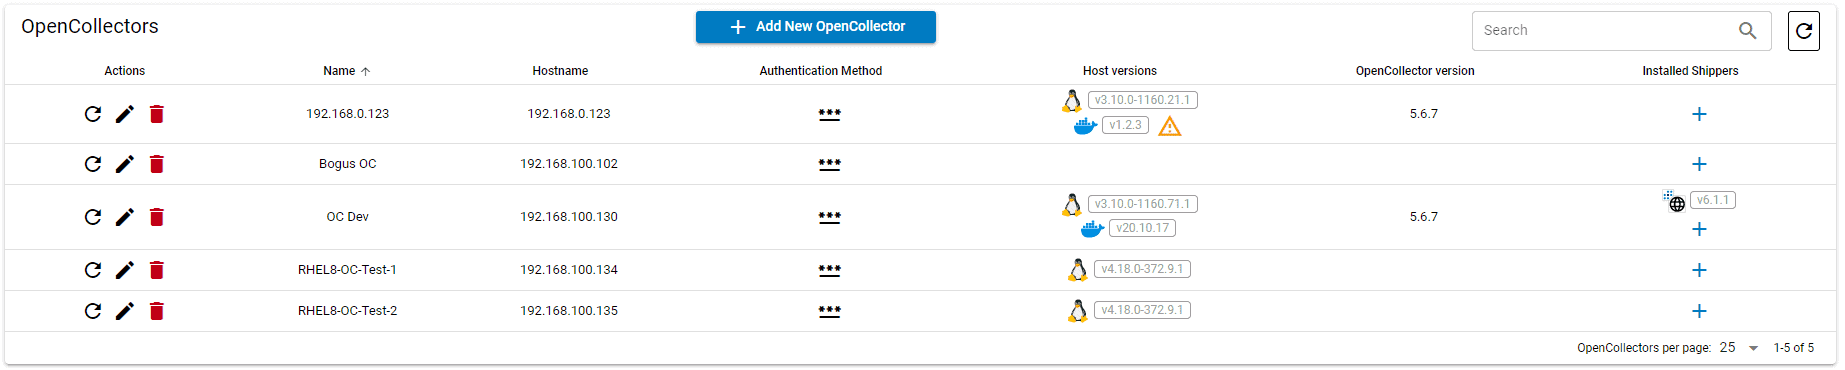 OC Admin features multiple Open Collector management